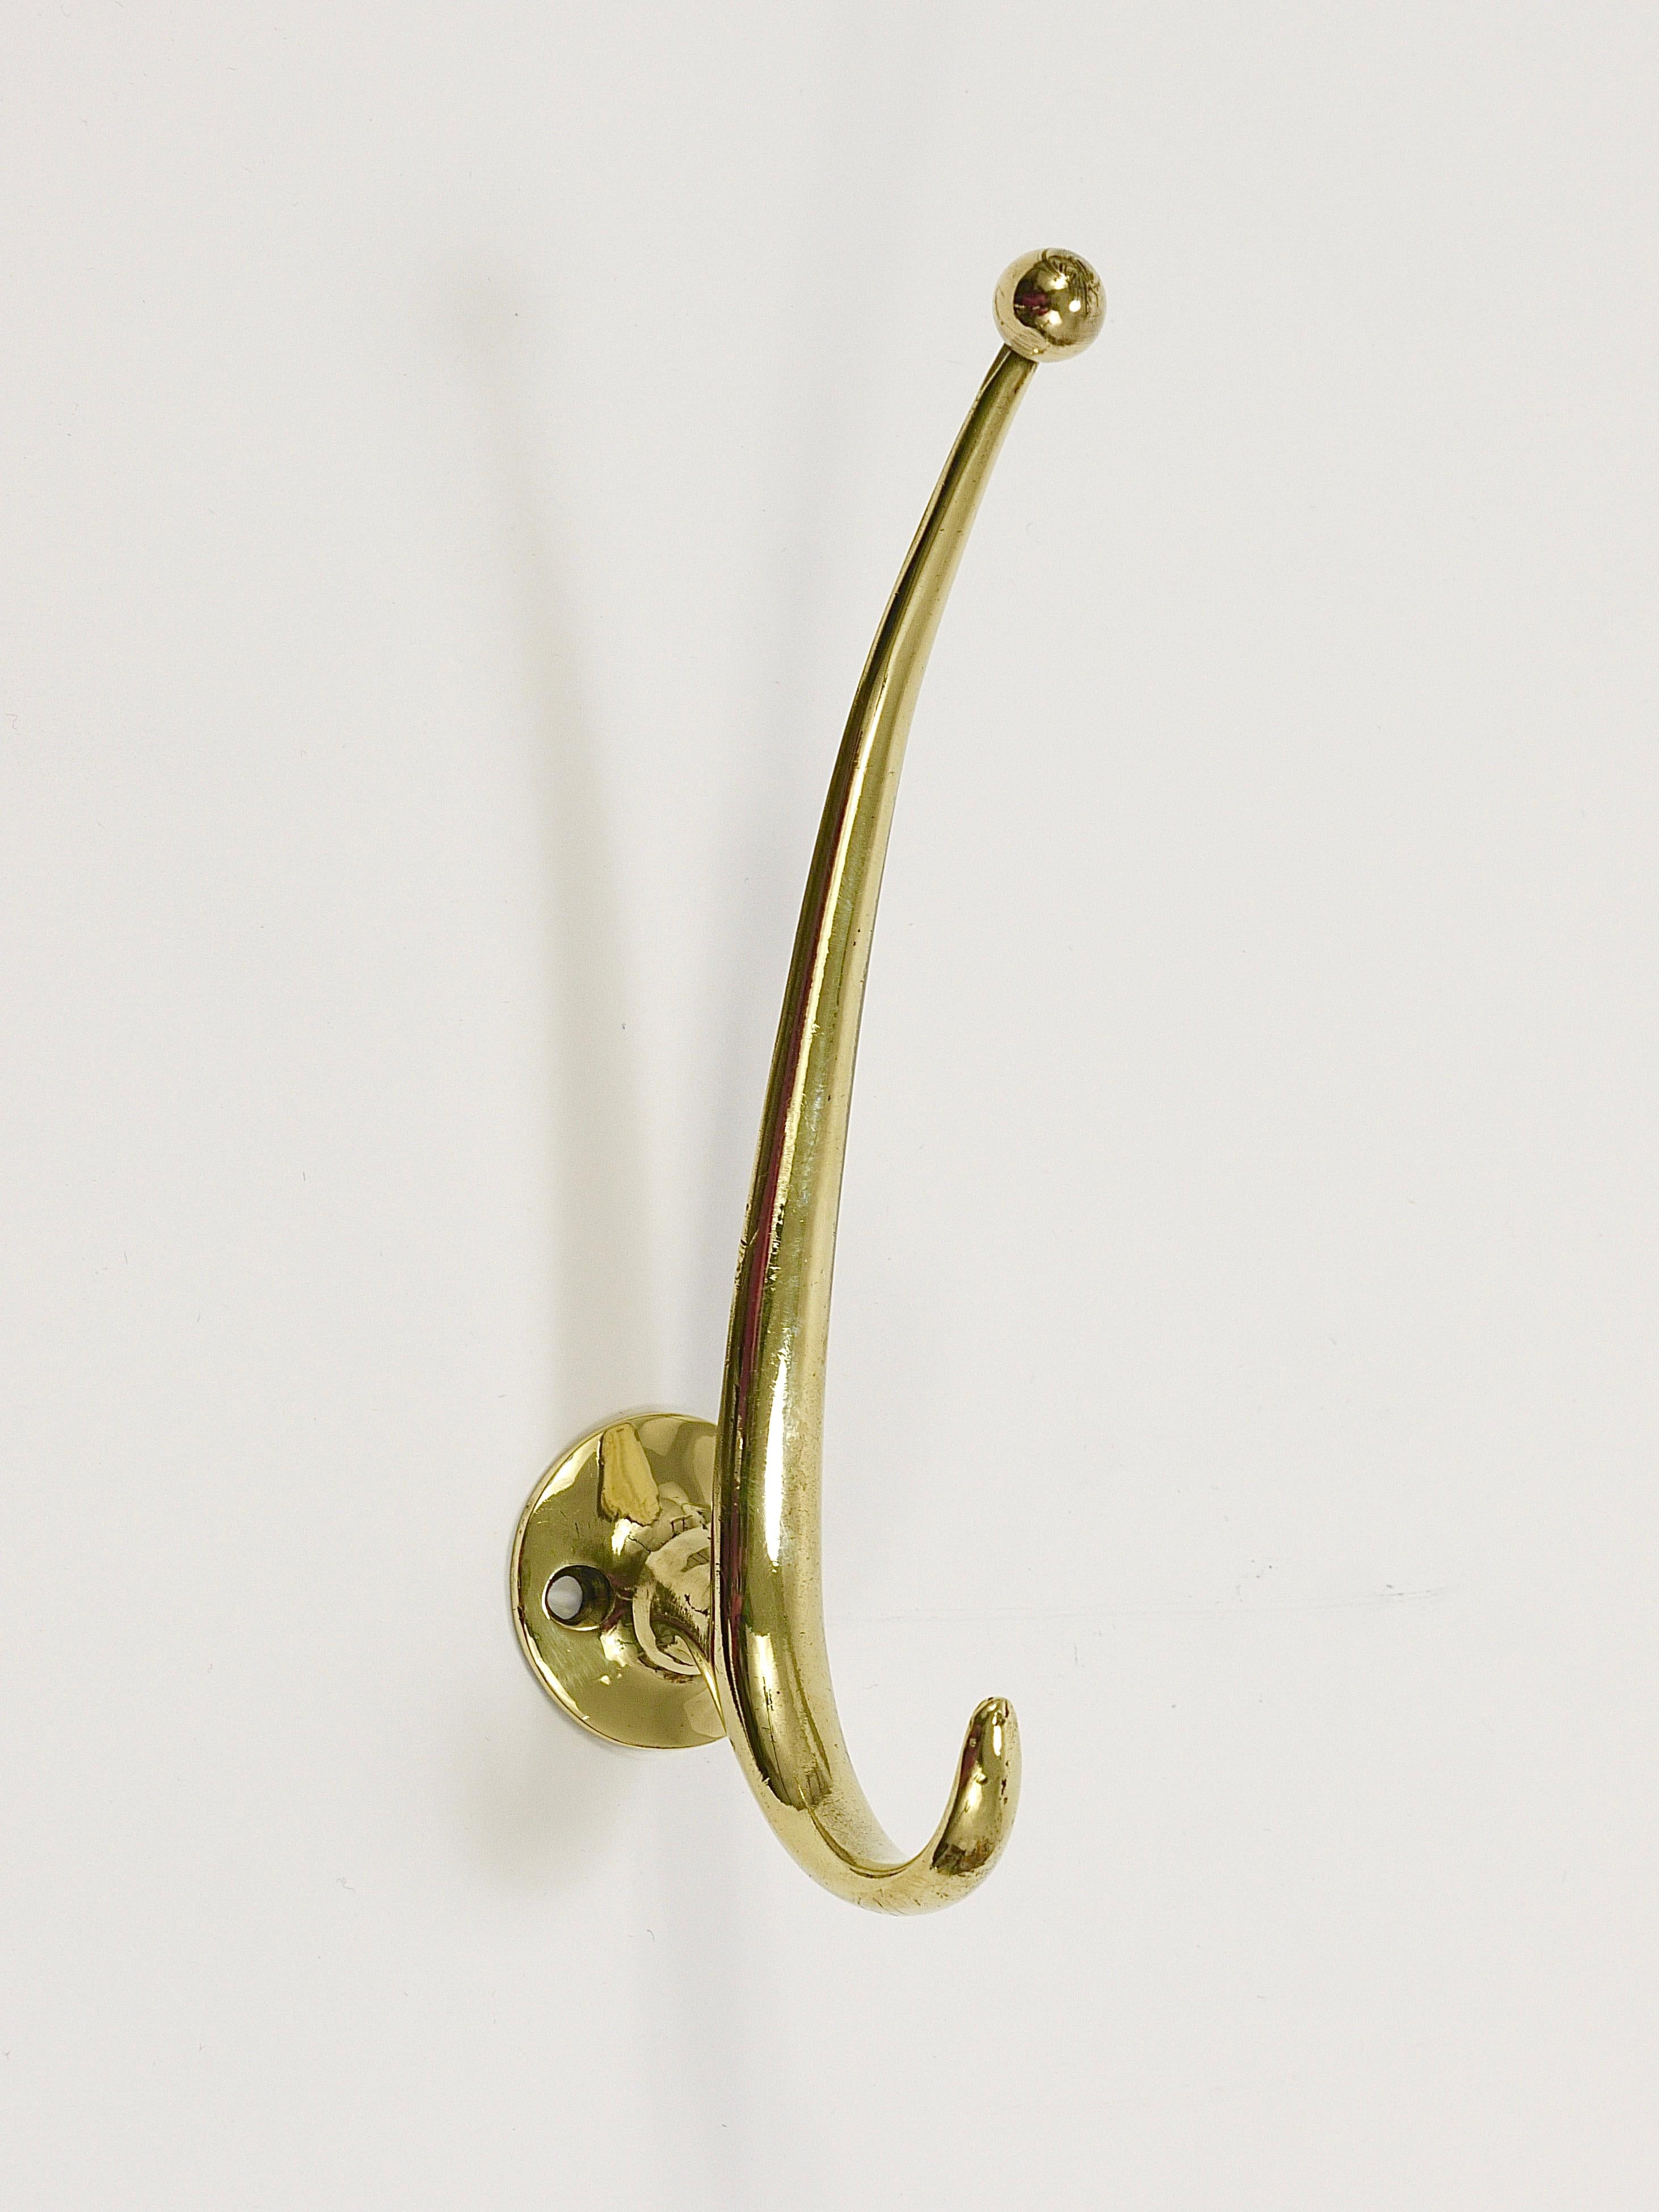 Six Franz Hagenauer Vienna Mid-Century Curved Brass Wall Coat Hooks, 1950s For Sale 1